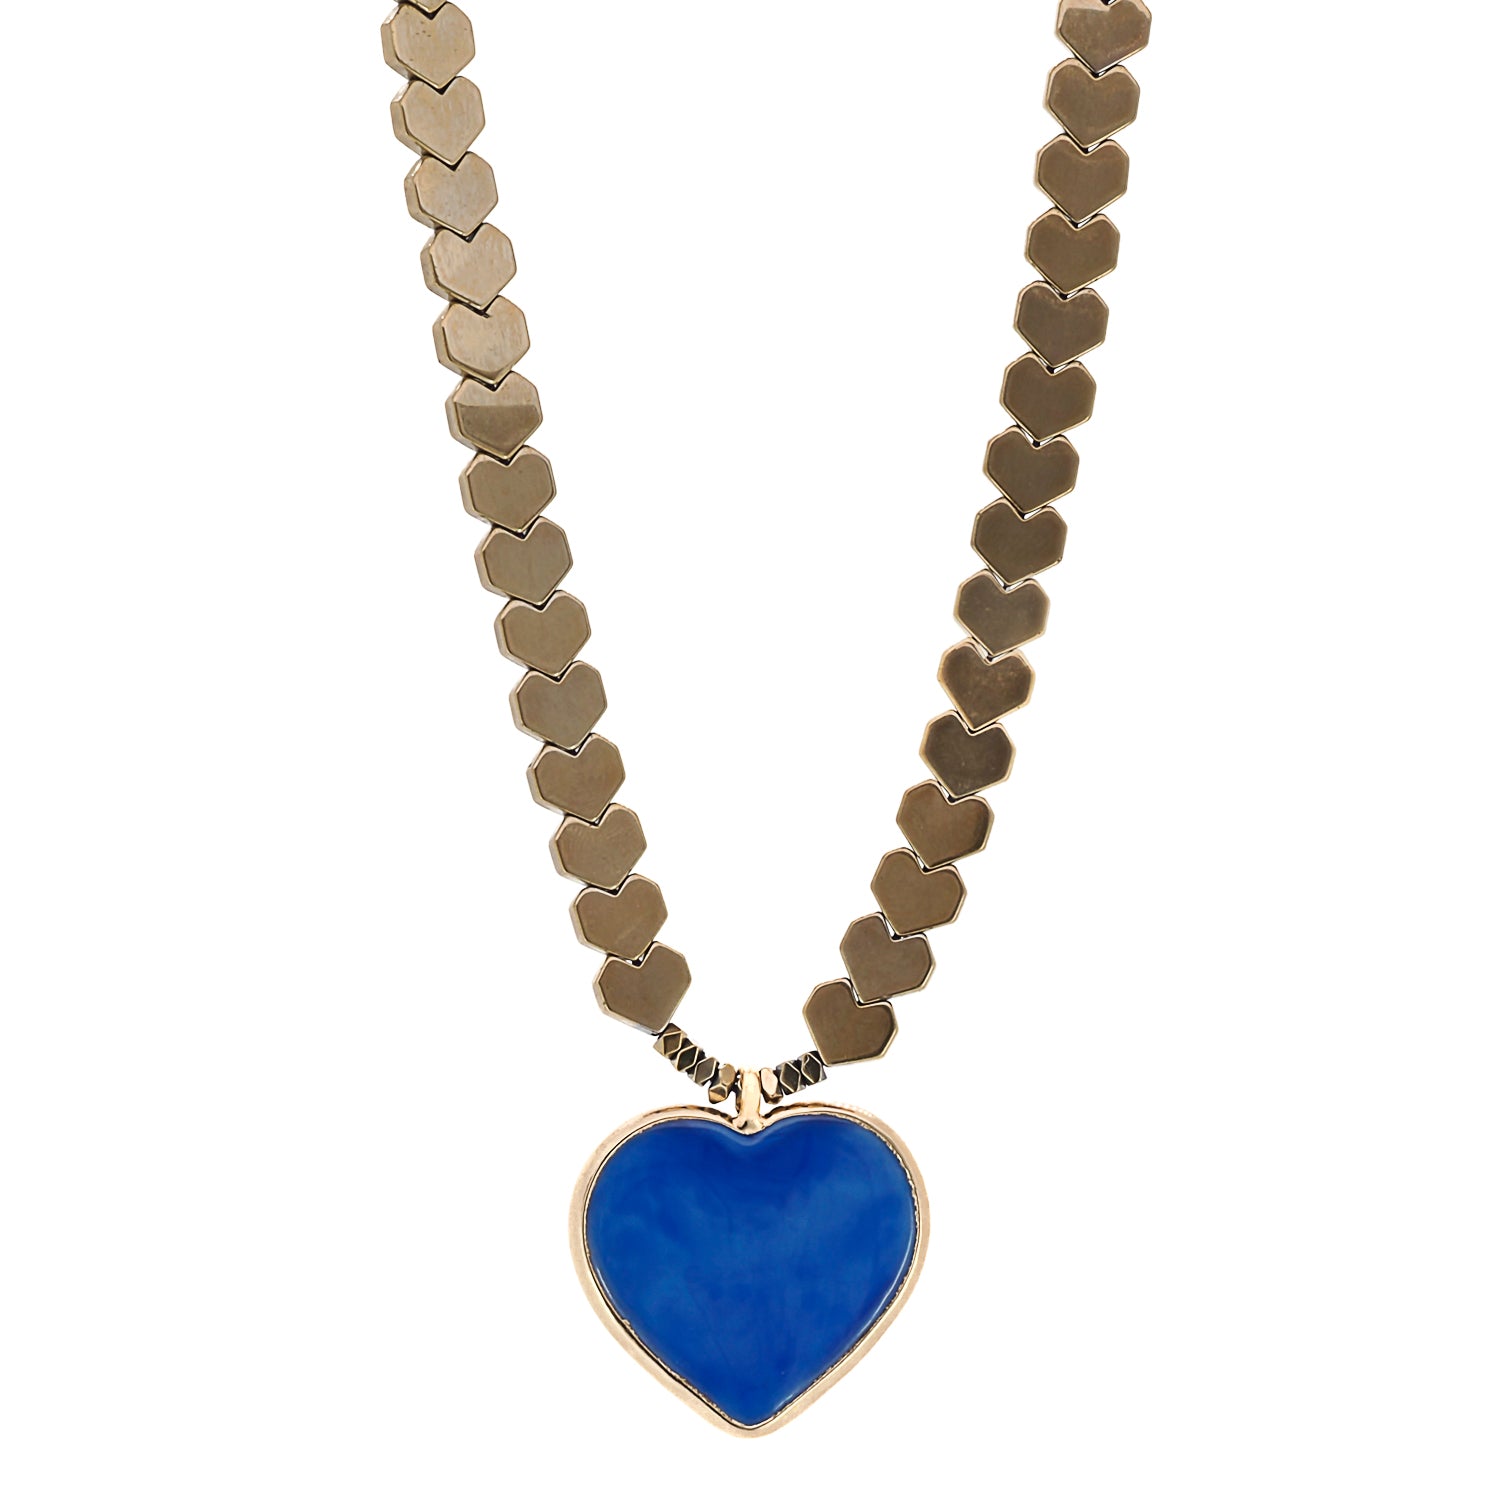 Close-up of the Happy Blue Heart Necklace, showcasing the intricate gold color heart shape hematite stone beads and the vibrant 18K gold plated blue heart ceramic pendant, highlighting its unique and eye-catching design.